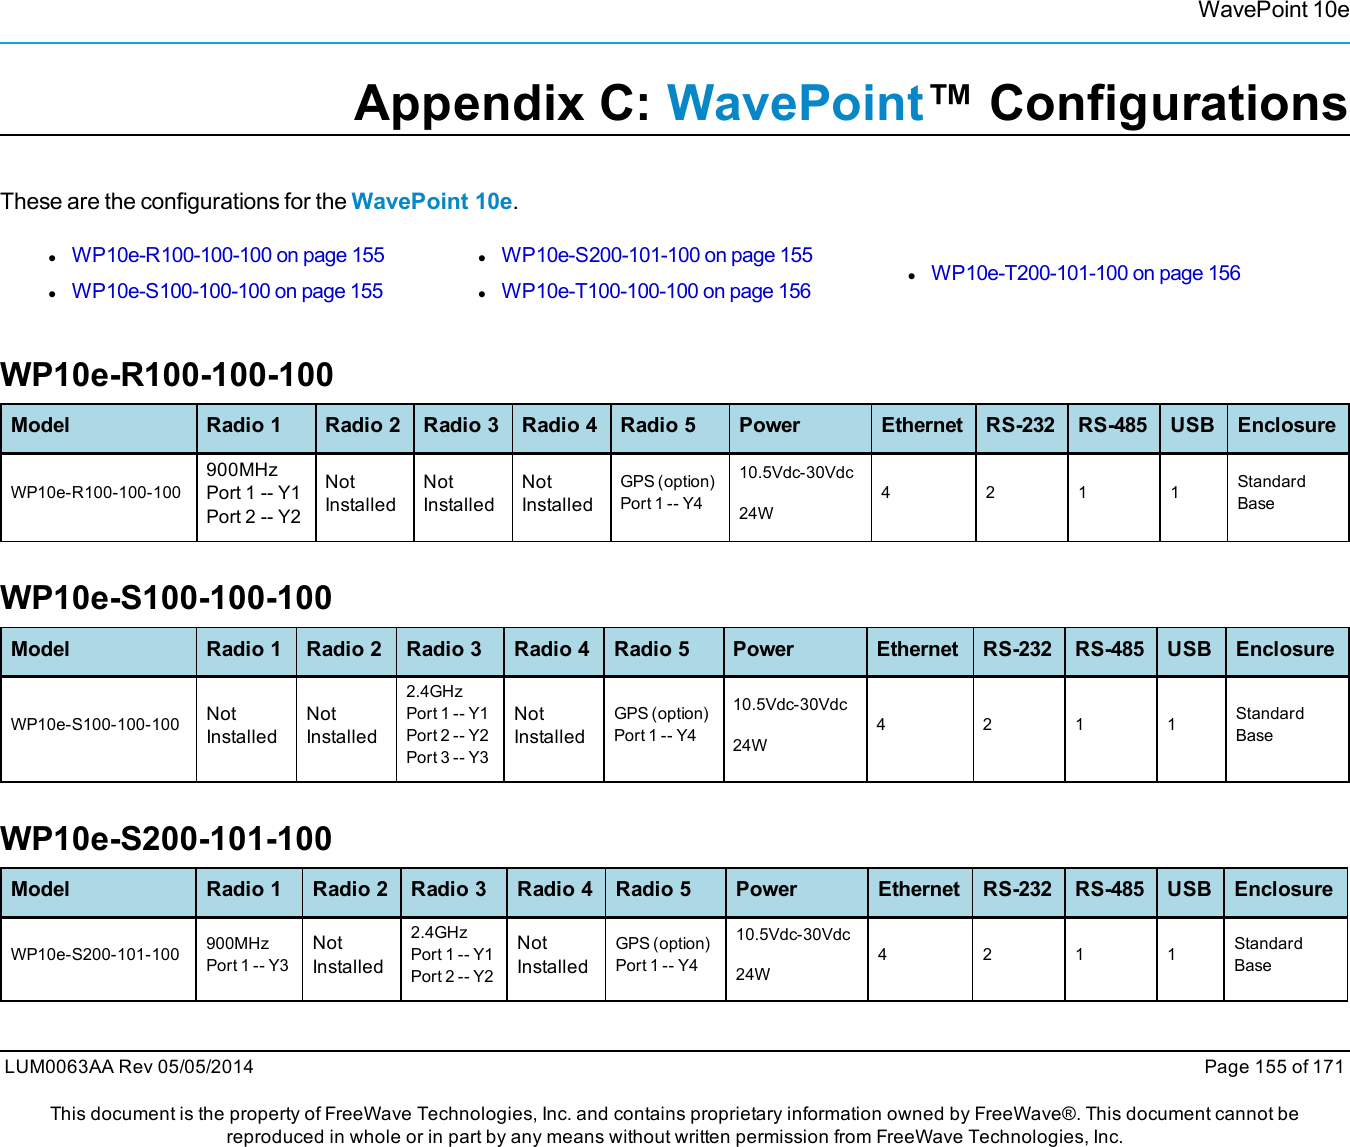 WavePoint 10eAppendix C: WavePoint™ ConfigurationsThese are the configurations for the WavePoint 10e.lWP10e-R100-100-100 on page 155lWP10e-S100-100-100 on page 155lWP10e-S200-101-100 on page 155lWP10e-T100-100-100 on page 156lWP10e-T200-101-100 on page 156WP10e-R100-100-100Model Radio 1 Radio 2 Radio 3 Radio 4 Radio 5 Power Ethernet RS-232 RS-485 USB EnclosureWP10e-R100-100-100900MHzPort 1 -- Y1Port 2 -- Y2NotInstalledNotInstalledNotInstalledGPS (option)Port 1 -- Y410.5Vdc-30Vdc24W4 2 1 1 StandardBaseWP10e-S100-100-100Model Radio 1 Radio 2 Radio 3 Radio 4 Radio 5 Power Ethernet RS-232 RS-485 USB EnclosureWP10e-S100-100-100 NotInstalledNotInstalled2.4GHzPort 1 -- Y1Port 2 -- Y2Port 3 -- Y3NotInstalledGPS (option)Port 1 -- Y410.5Vdc-30Vdc24W4 2 1 1 StandardBaseWP10e-S200-101-100Model Radio 1 Radio 2 Radio 3 Radio 4 Radio 5 Power Ethernet RS-232 RS-485 USB EnclosureWP10e-S200-101-100 900MHzPort 1 -- Y3NotInstalled2.4GHzPort 1 -- Y1Port 2 -- Y2NotInstalledGPS (option)Port 1 -- Y410.5Vdc-30Vdc24W4 2 1 1 StandardBaseLUM0063AA Rev 05/05/2014 Page 155 of 171This document is the property of FreeWave Technologies, Inc. and contains proprietary information owned by FreeWave®. This document cannot bereproduced in whole or in part by any means without written permission from FreeWave Technologies, Inc.